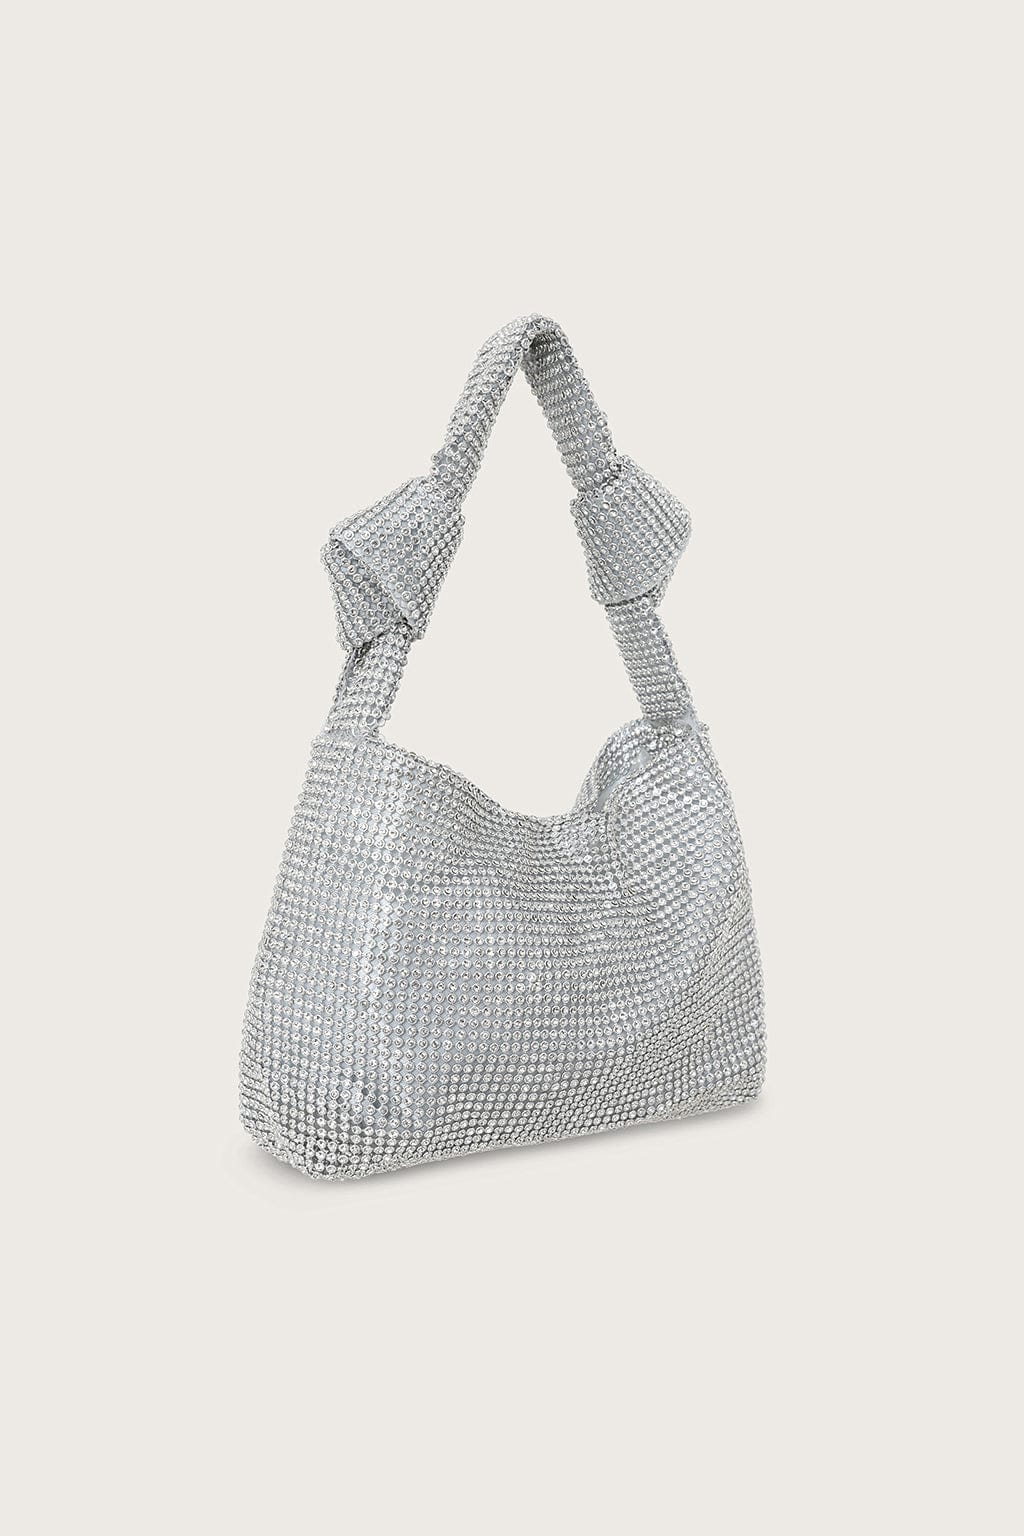 DIANE Knotted Strap Embellished Diamante Grab Bag in Silver